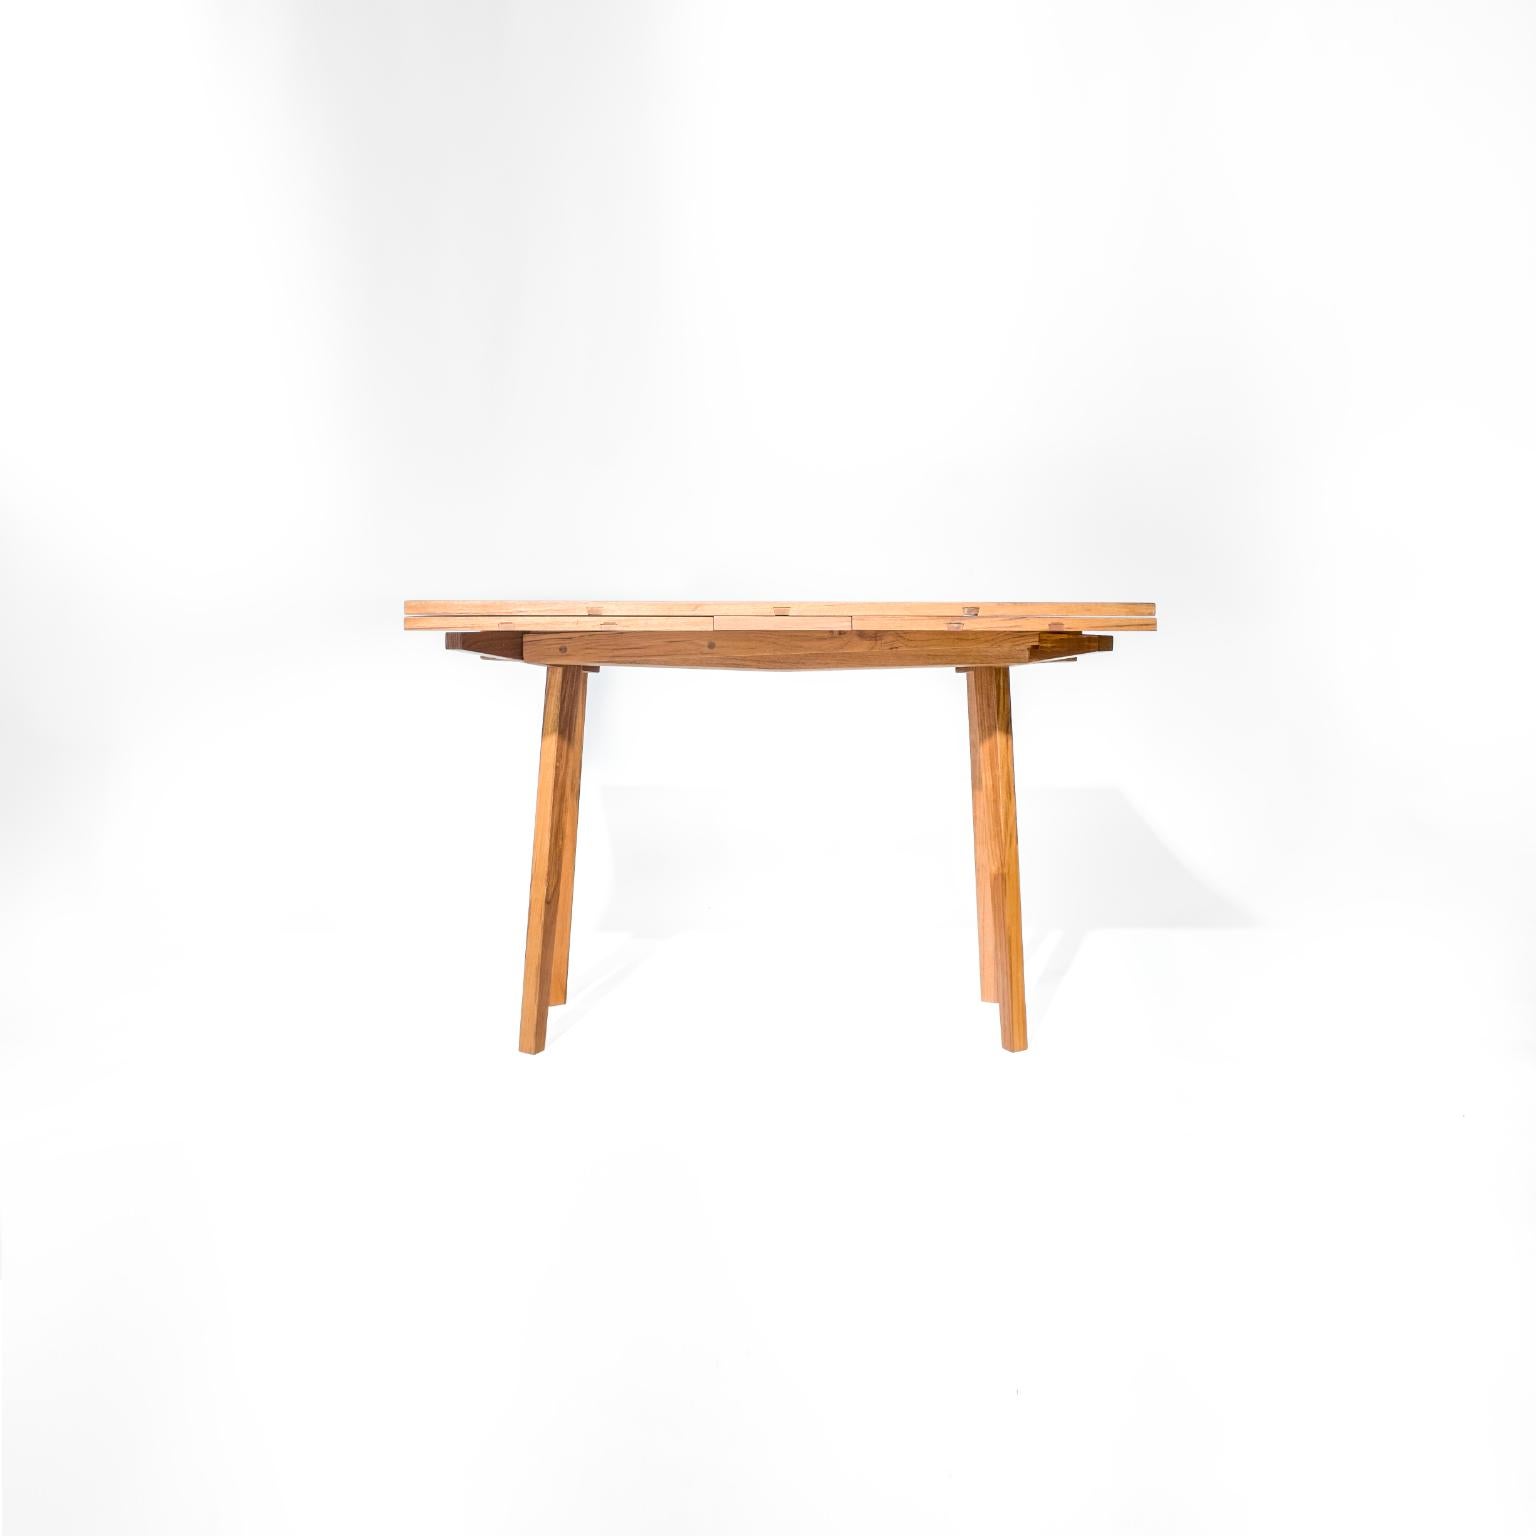 Dutch Pull Out Table in Hardwood with Japanese Joinery and Danish Aesthetics In New Condition For Sale In Brooklyn, NY